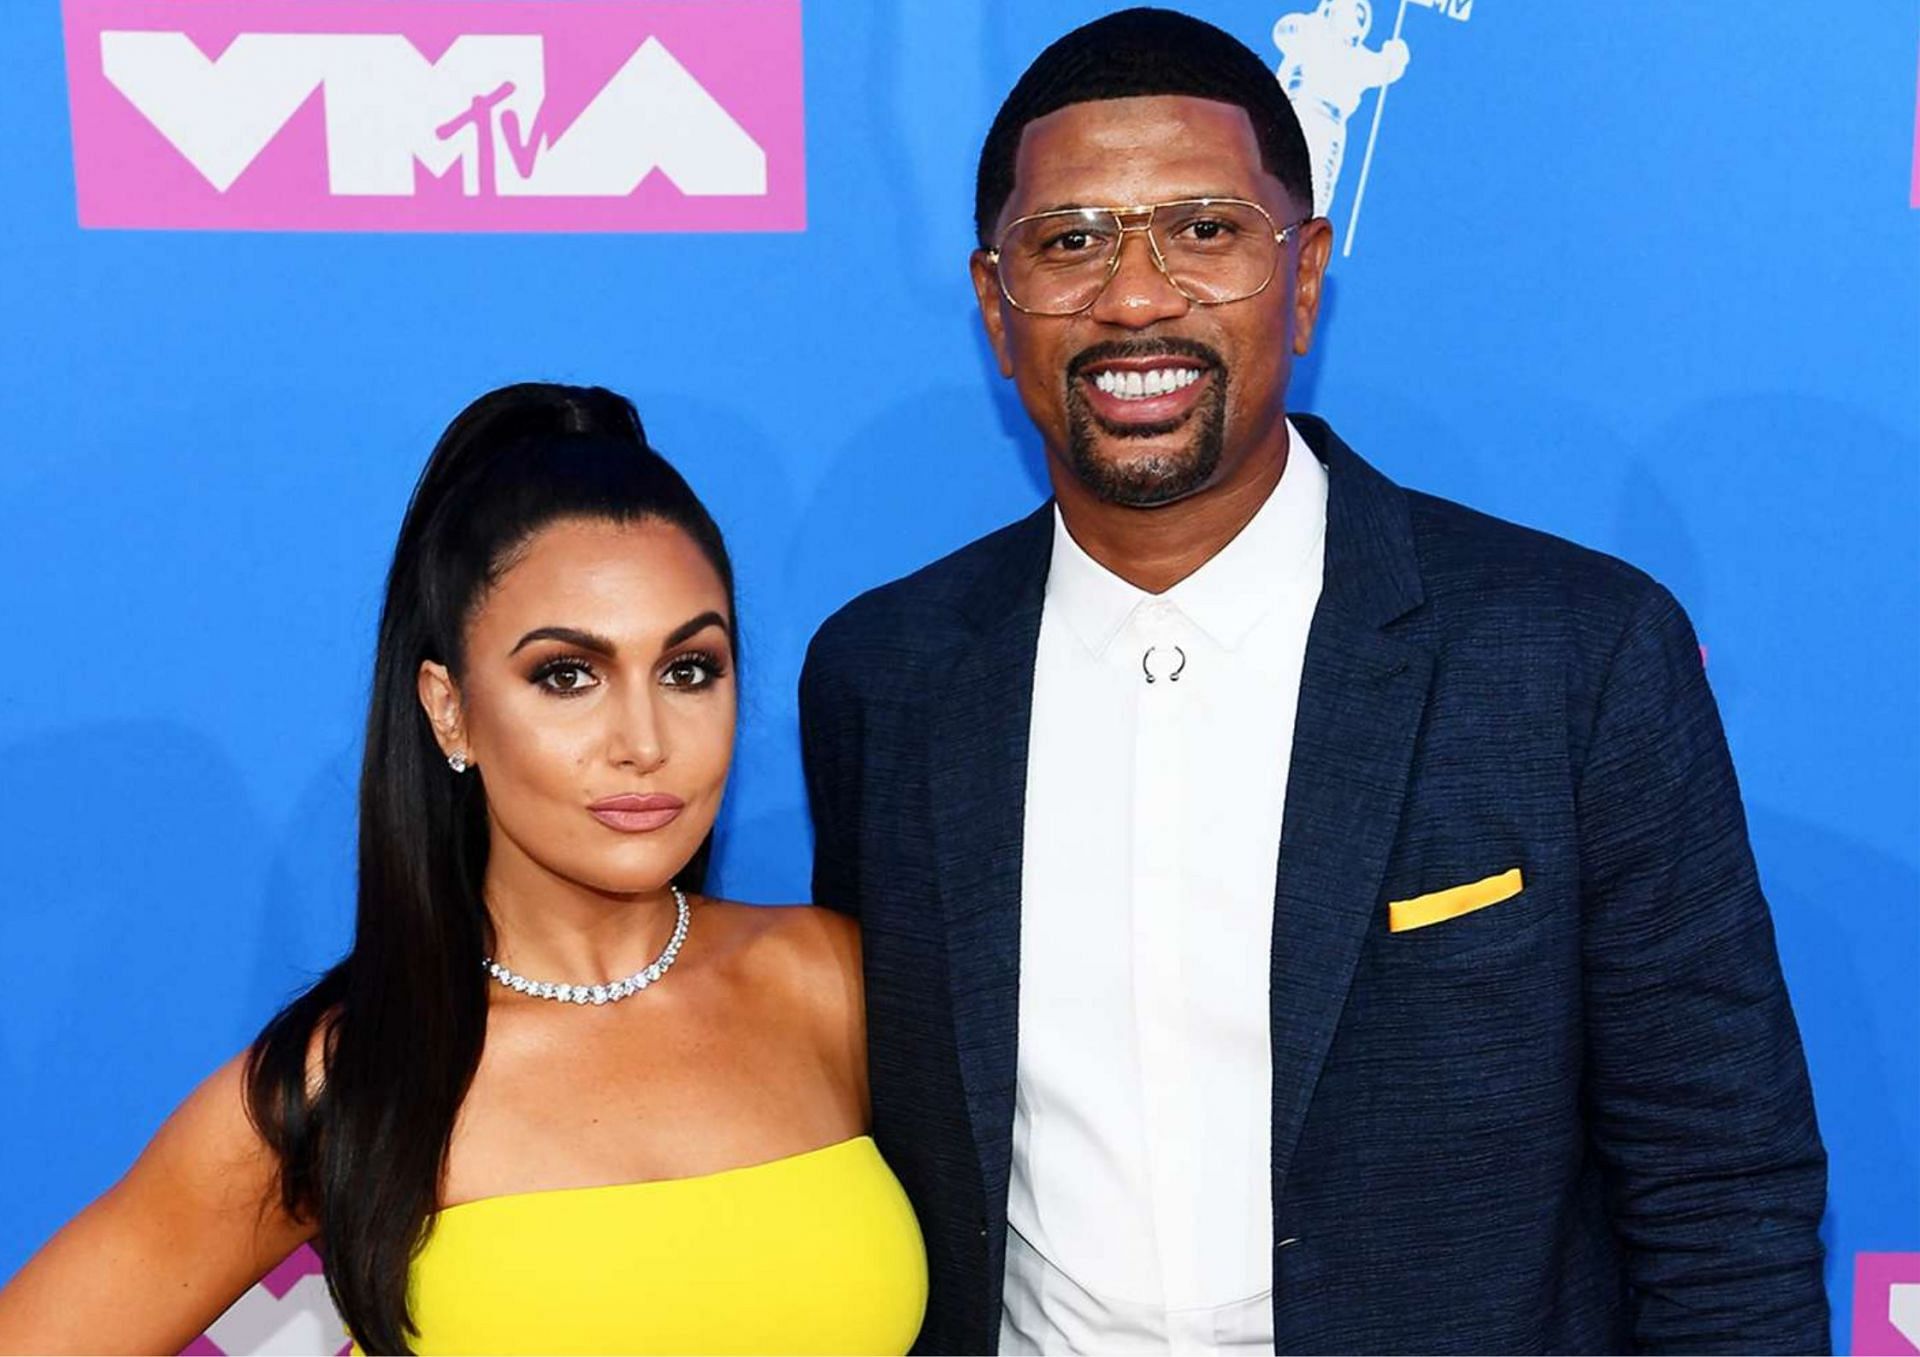 Jalen Rose and Molly Qerim were officially divorced in December 2021. [photo: People.com]